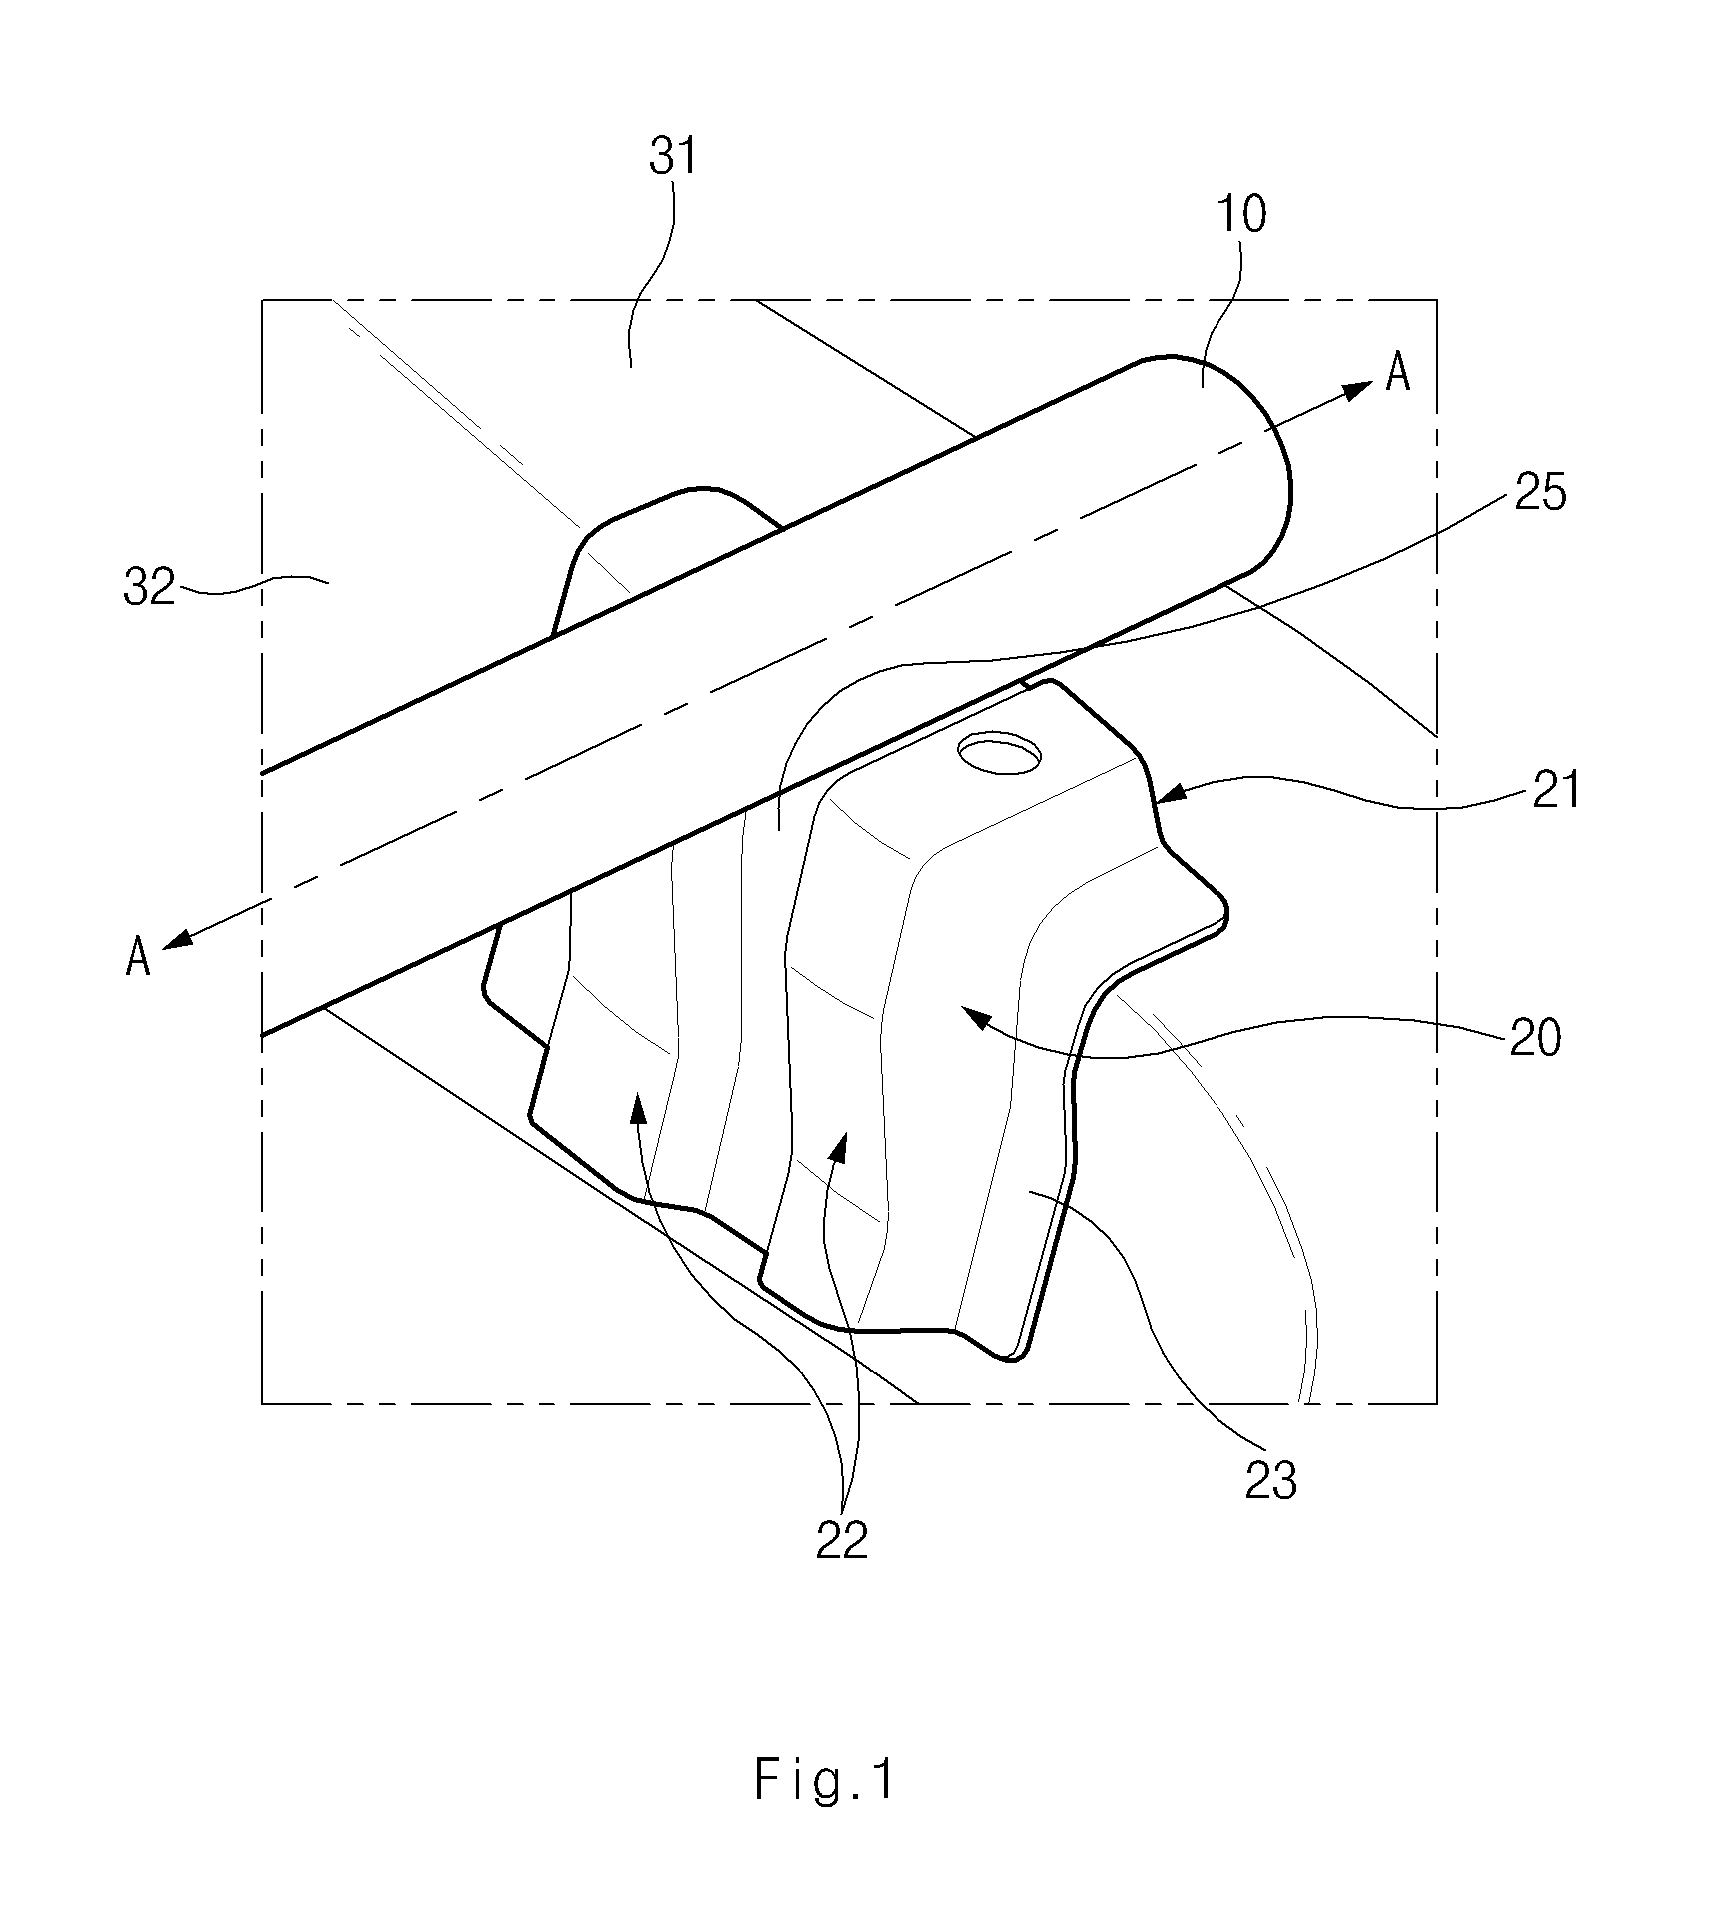 Supporting structure of door impact beam for vehicle